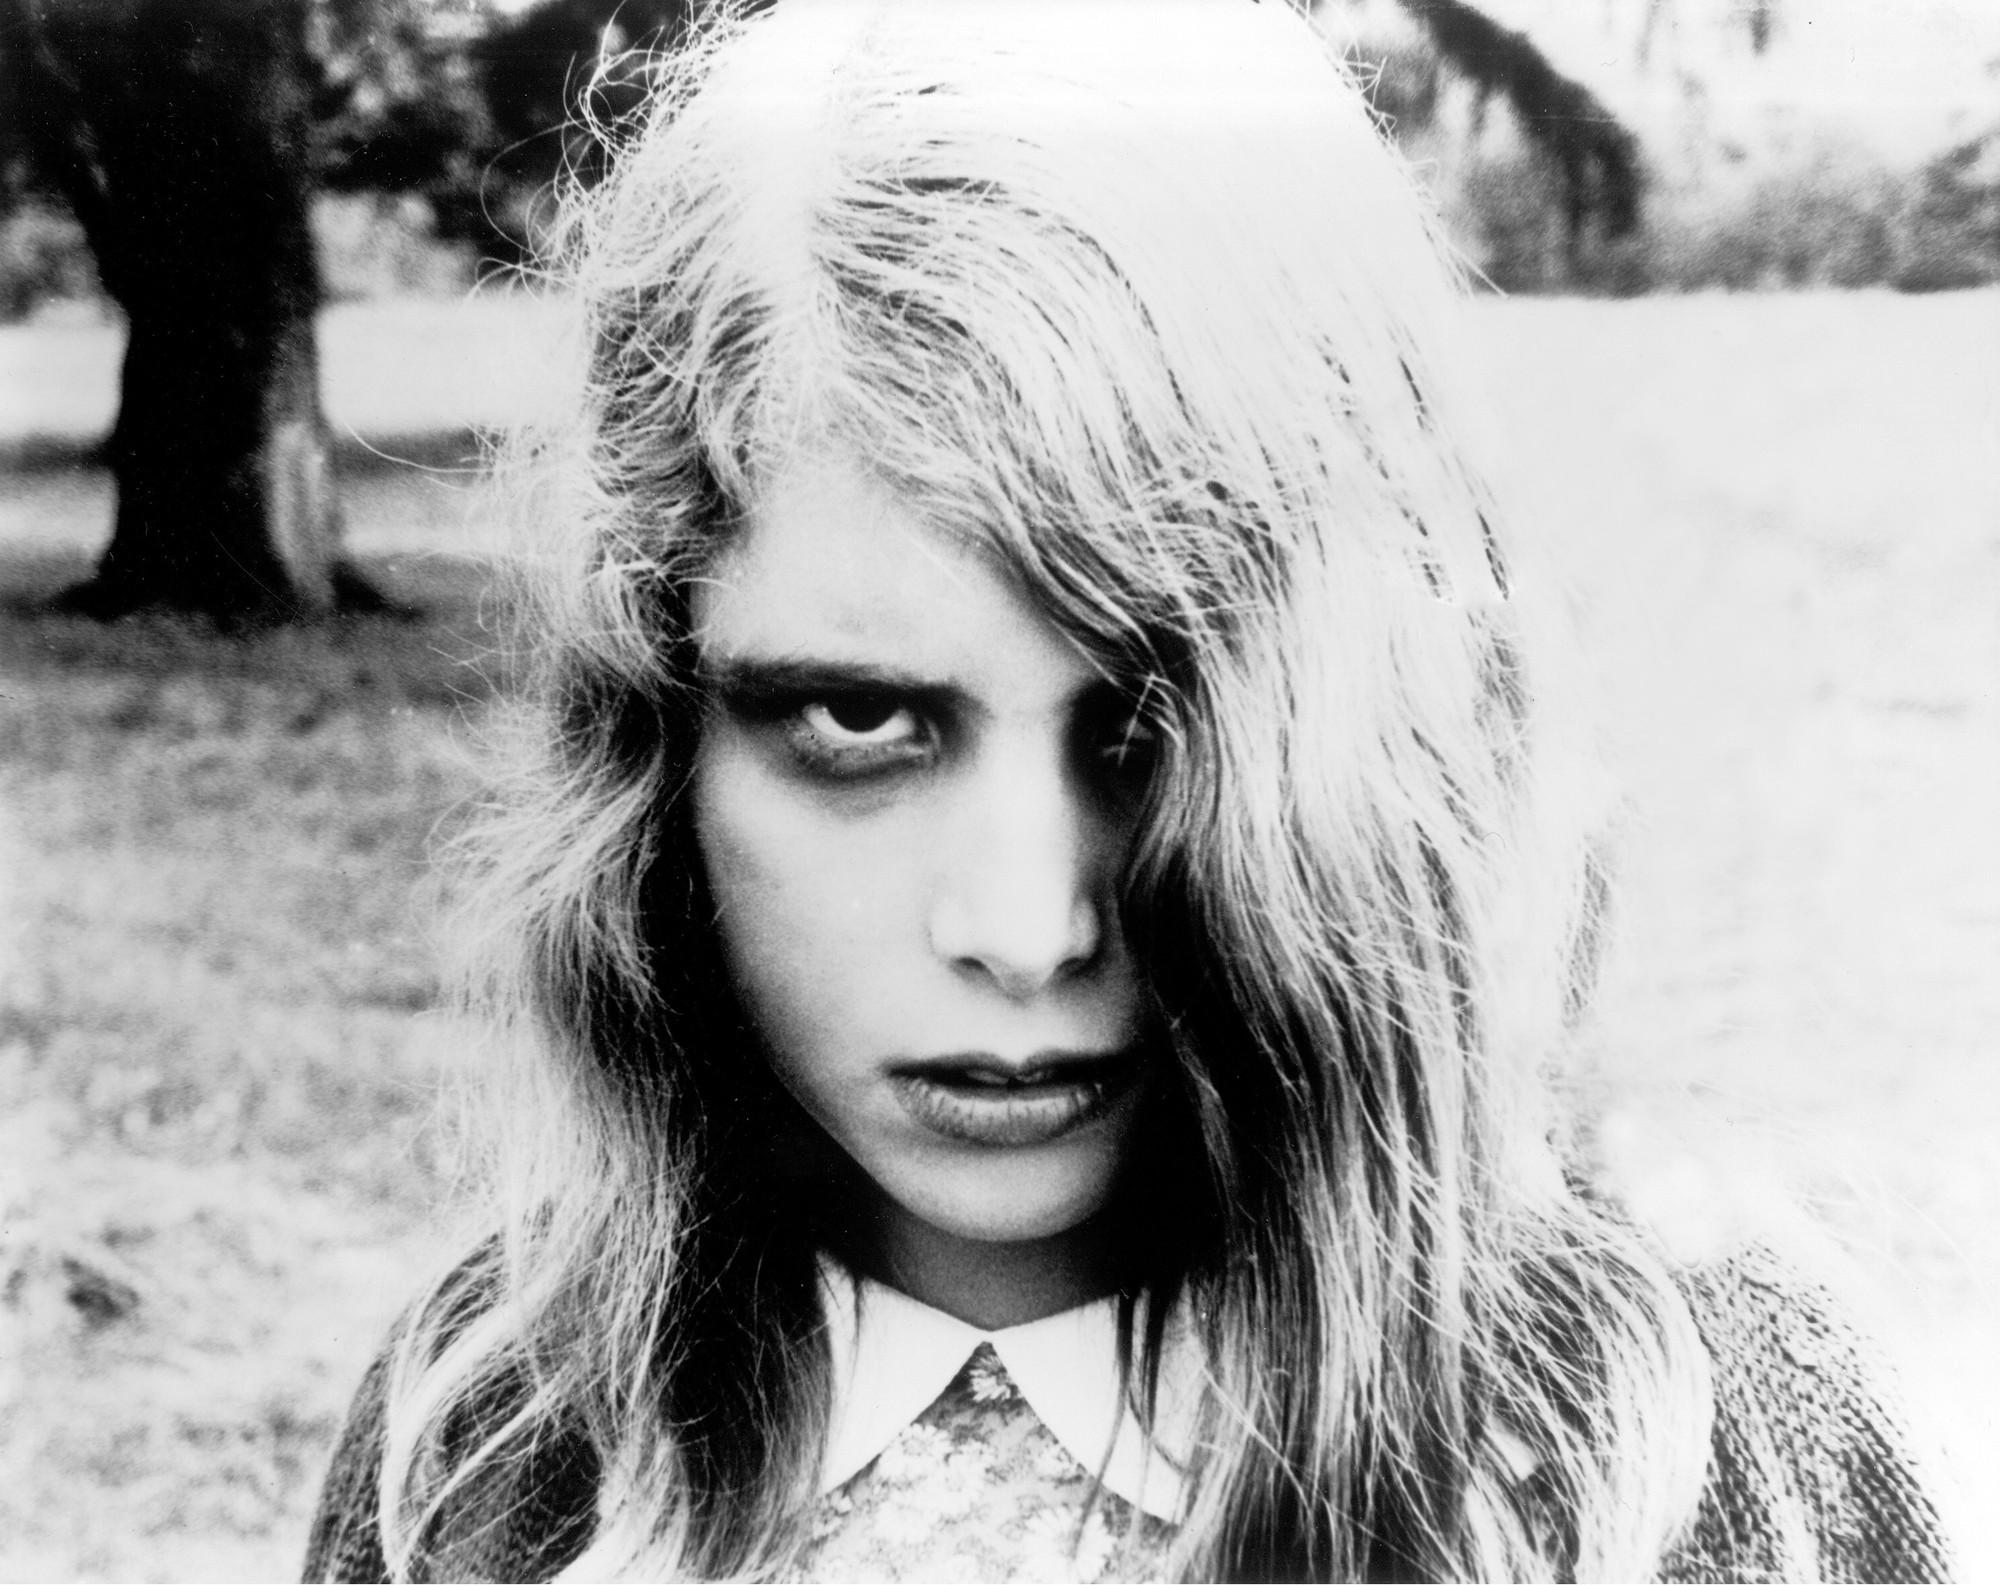 Night of the living dead review